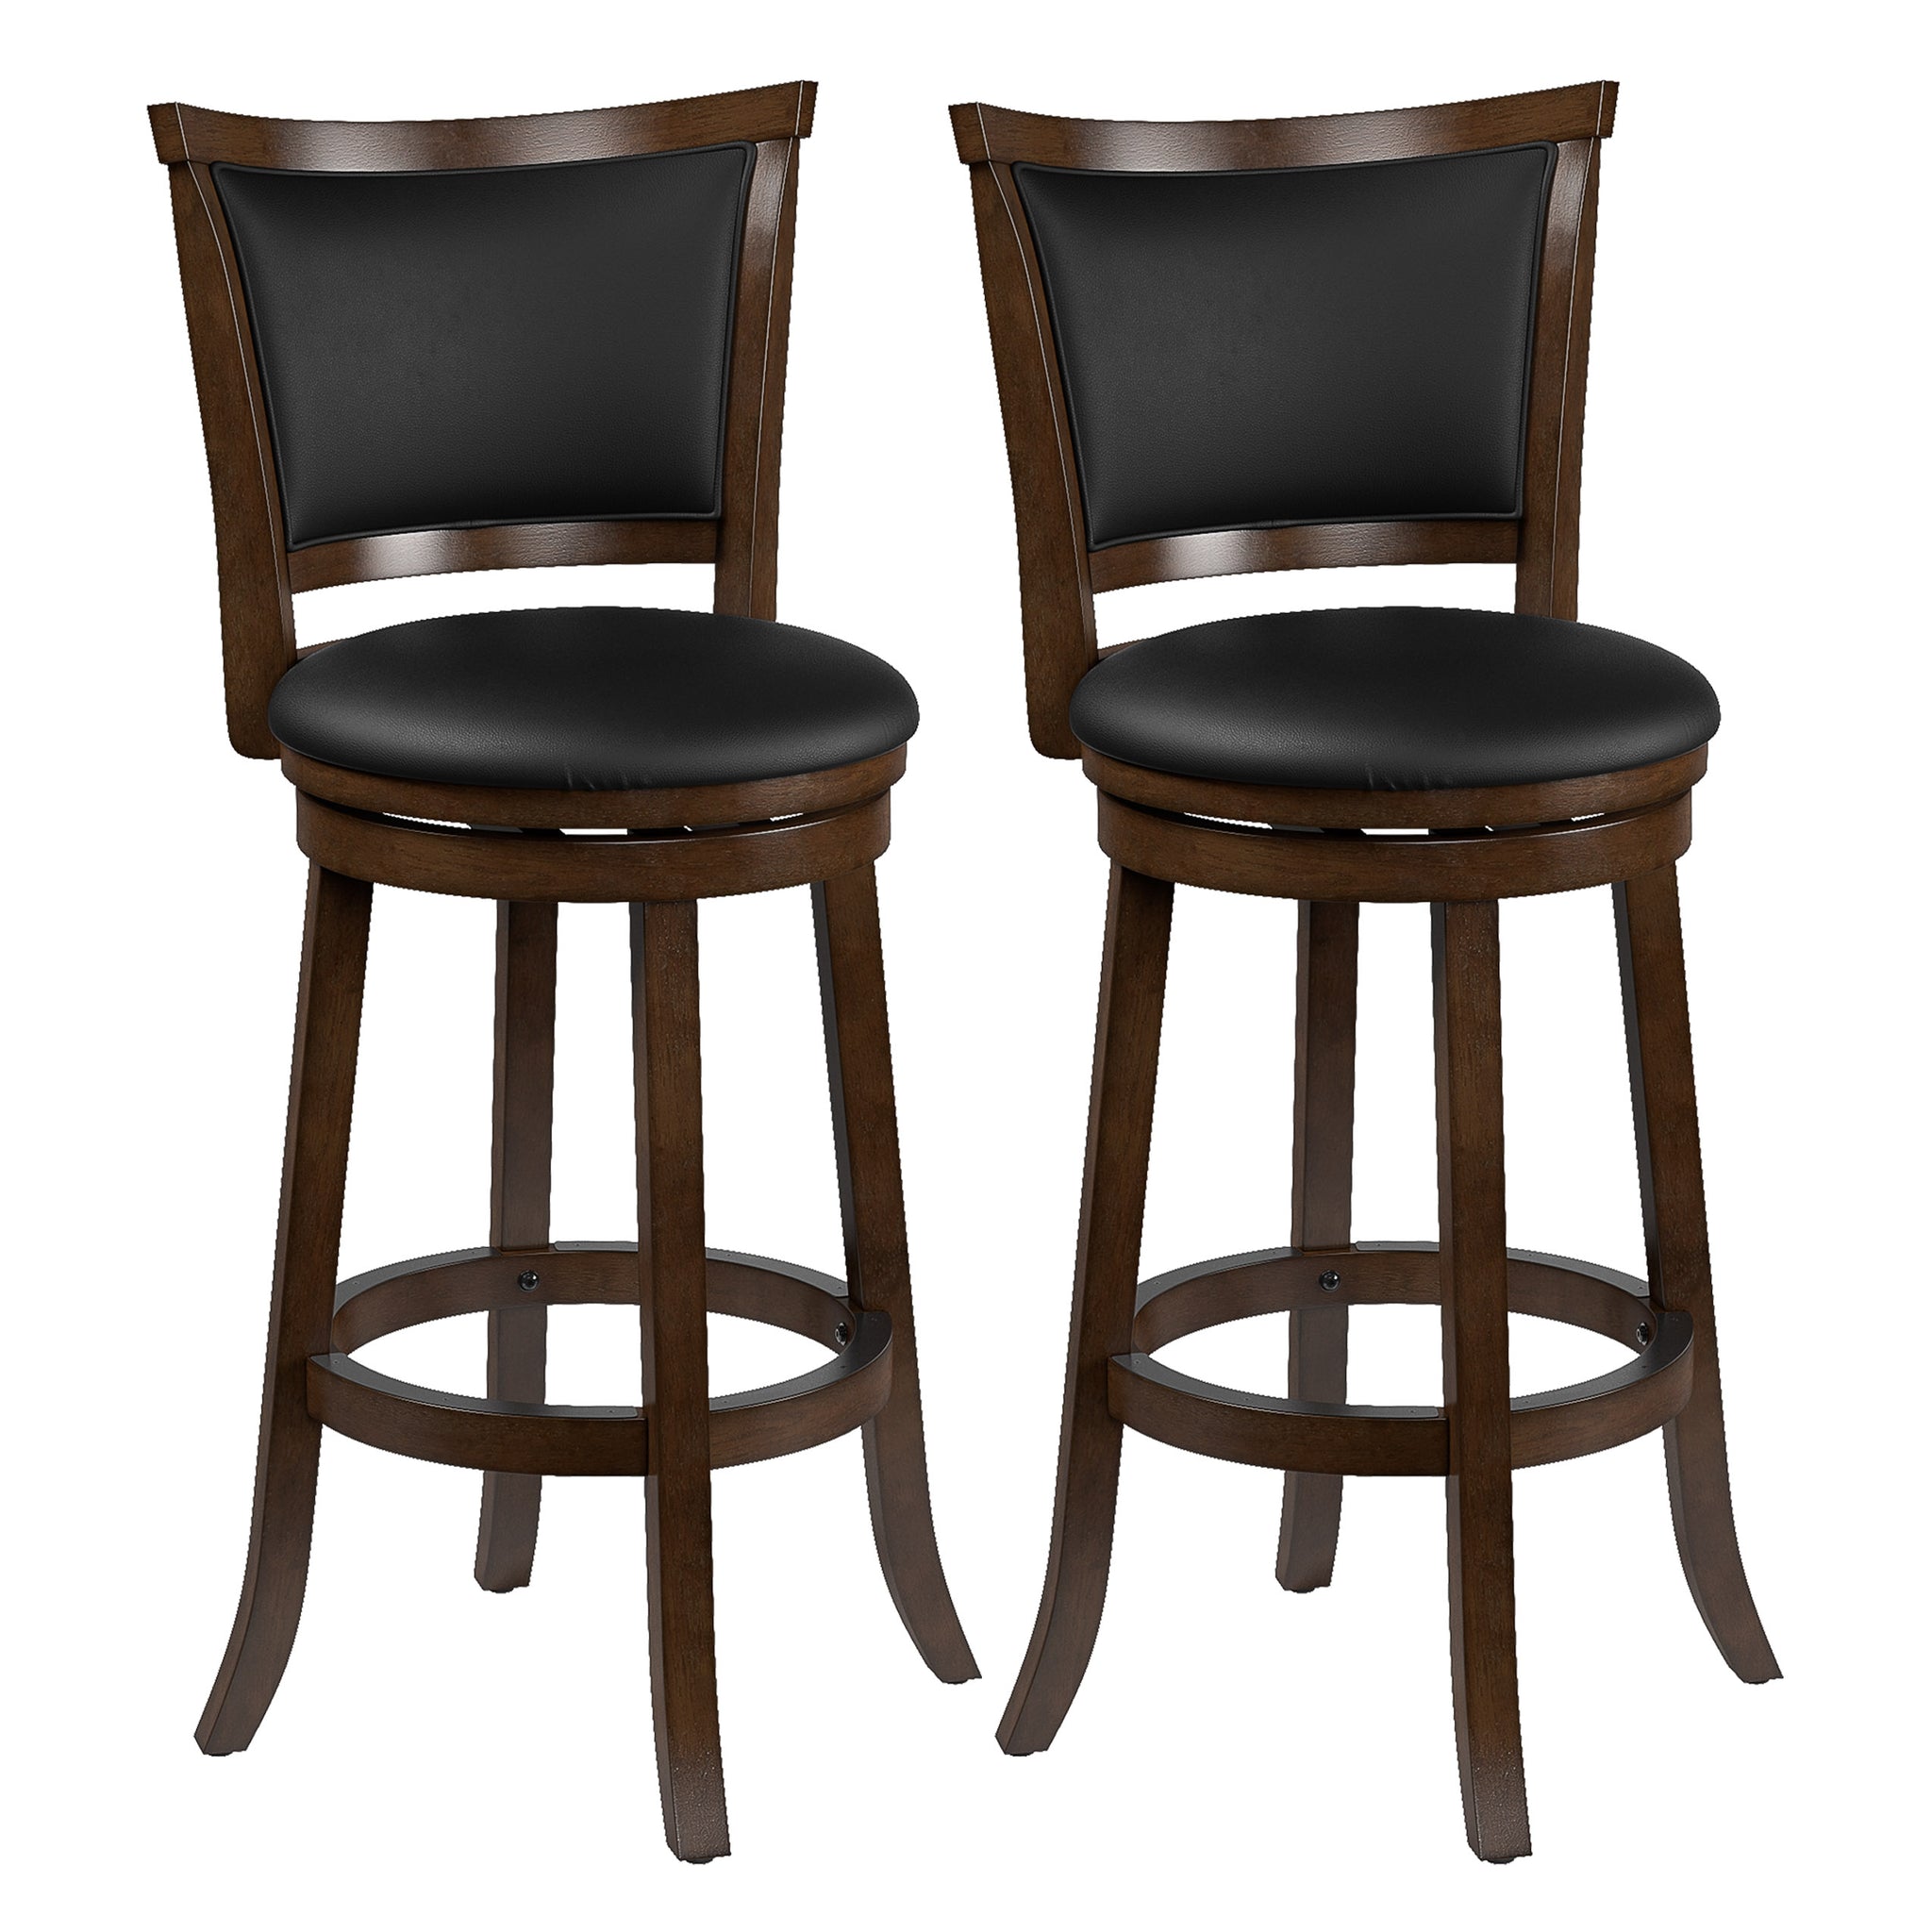 Woodgrove Bar Height Wood Bar Stools with PU Leather Seat and Backrest